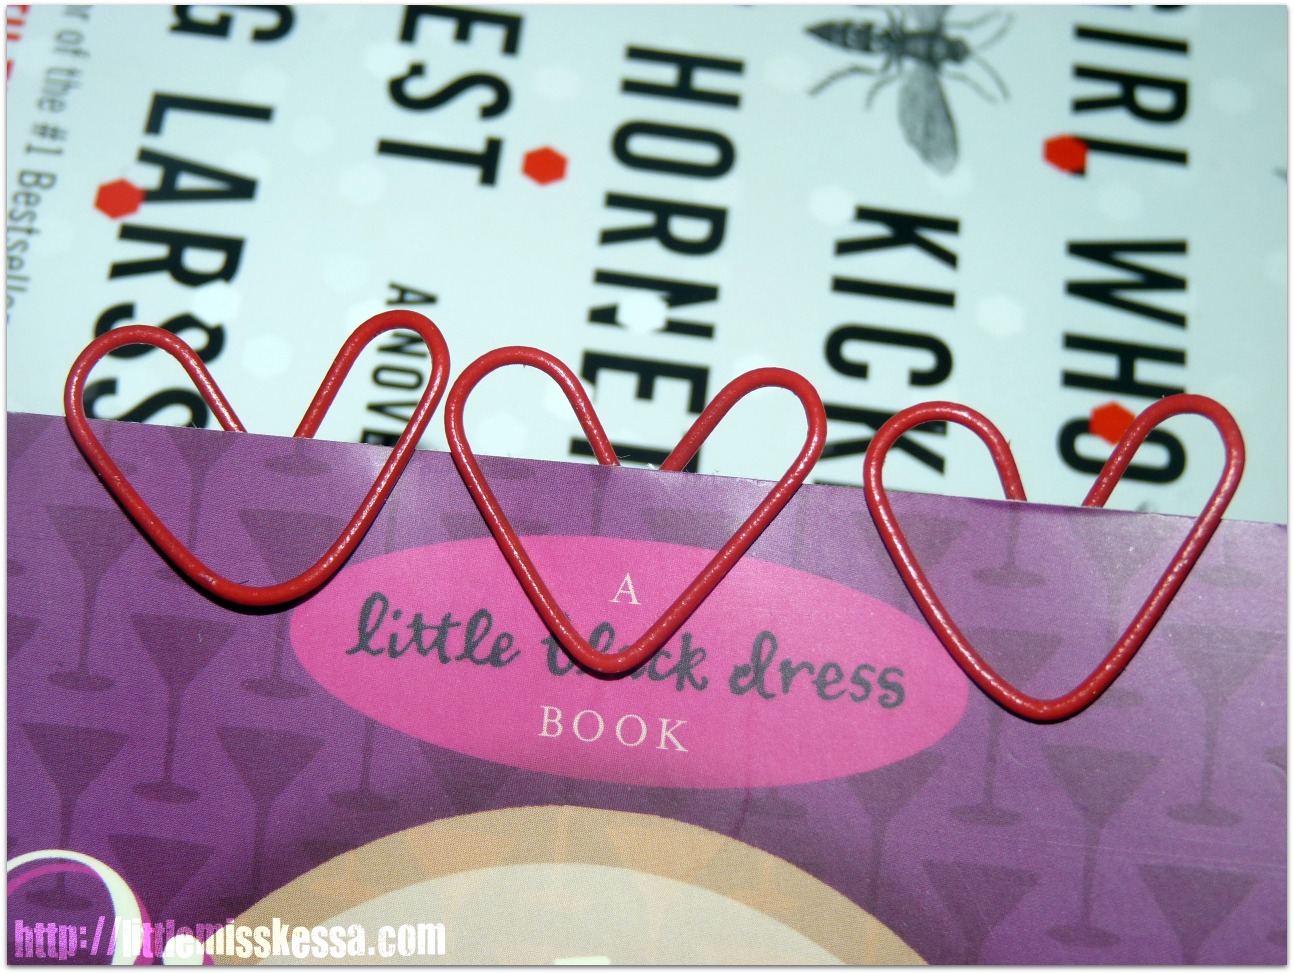 15-minute make: heart shaped paperclips